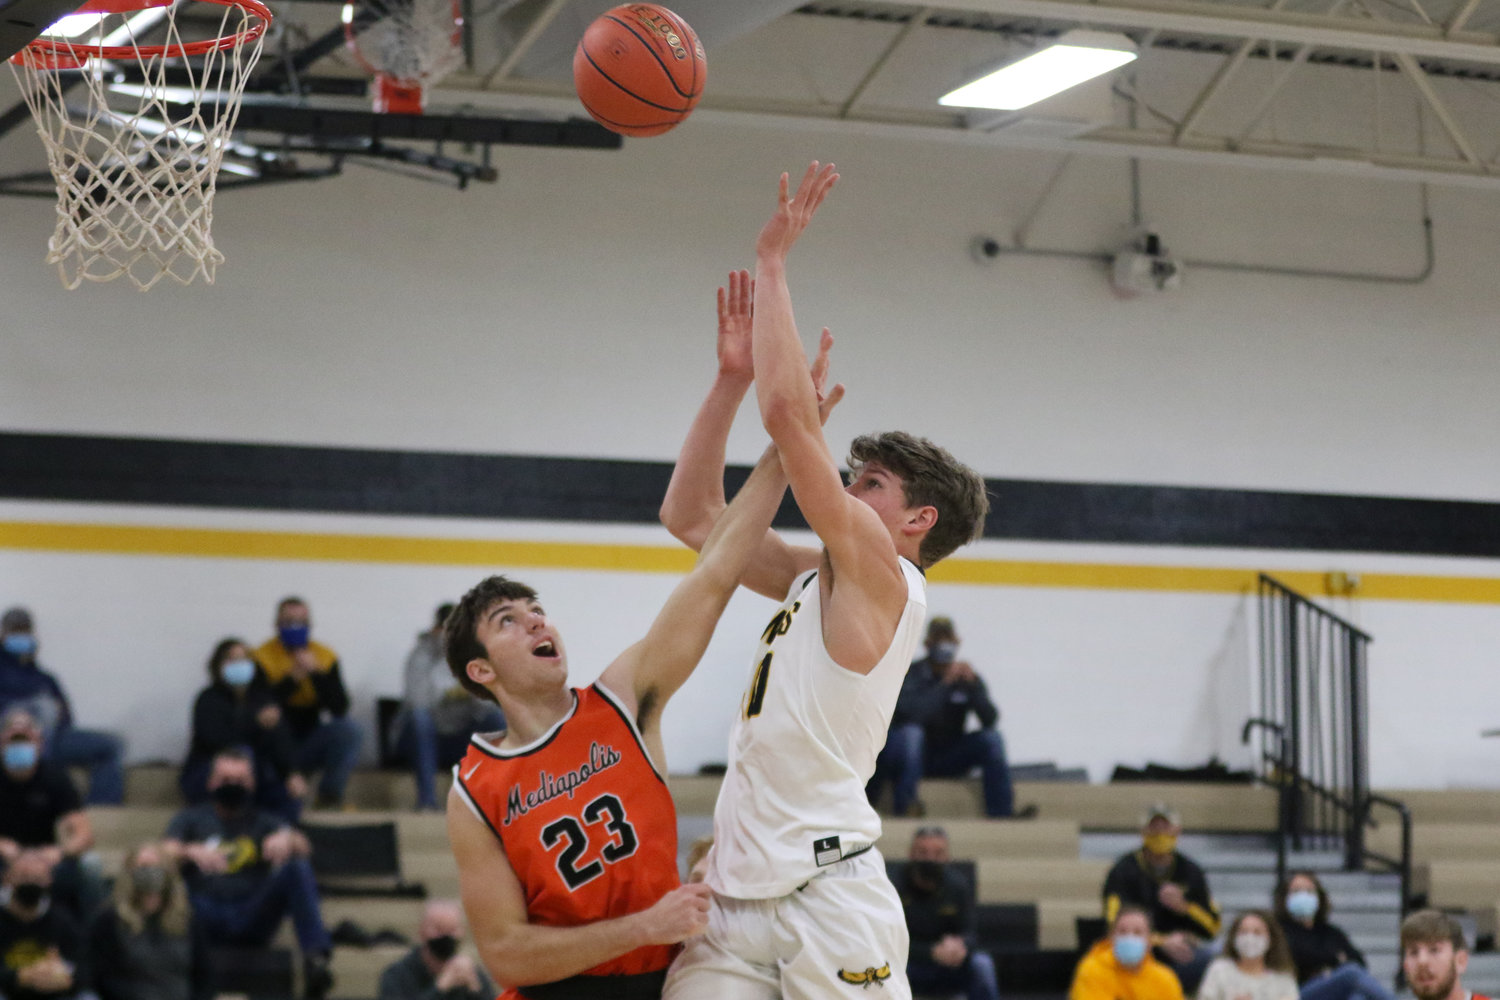 Mid-Prairie forward Carter Harmsen shoots over a Bulldog defender during the first quarter of a scrimmage with Mediapolis in Wellman on Saturday, November 21.